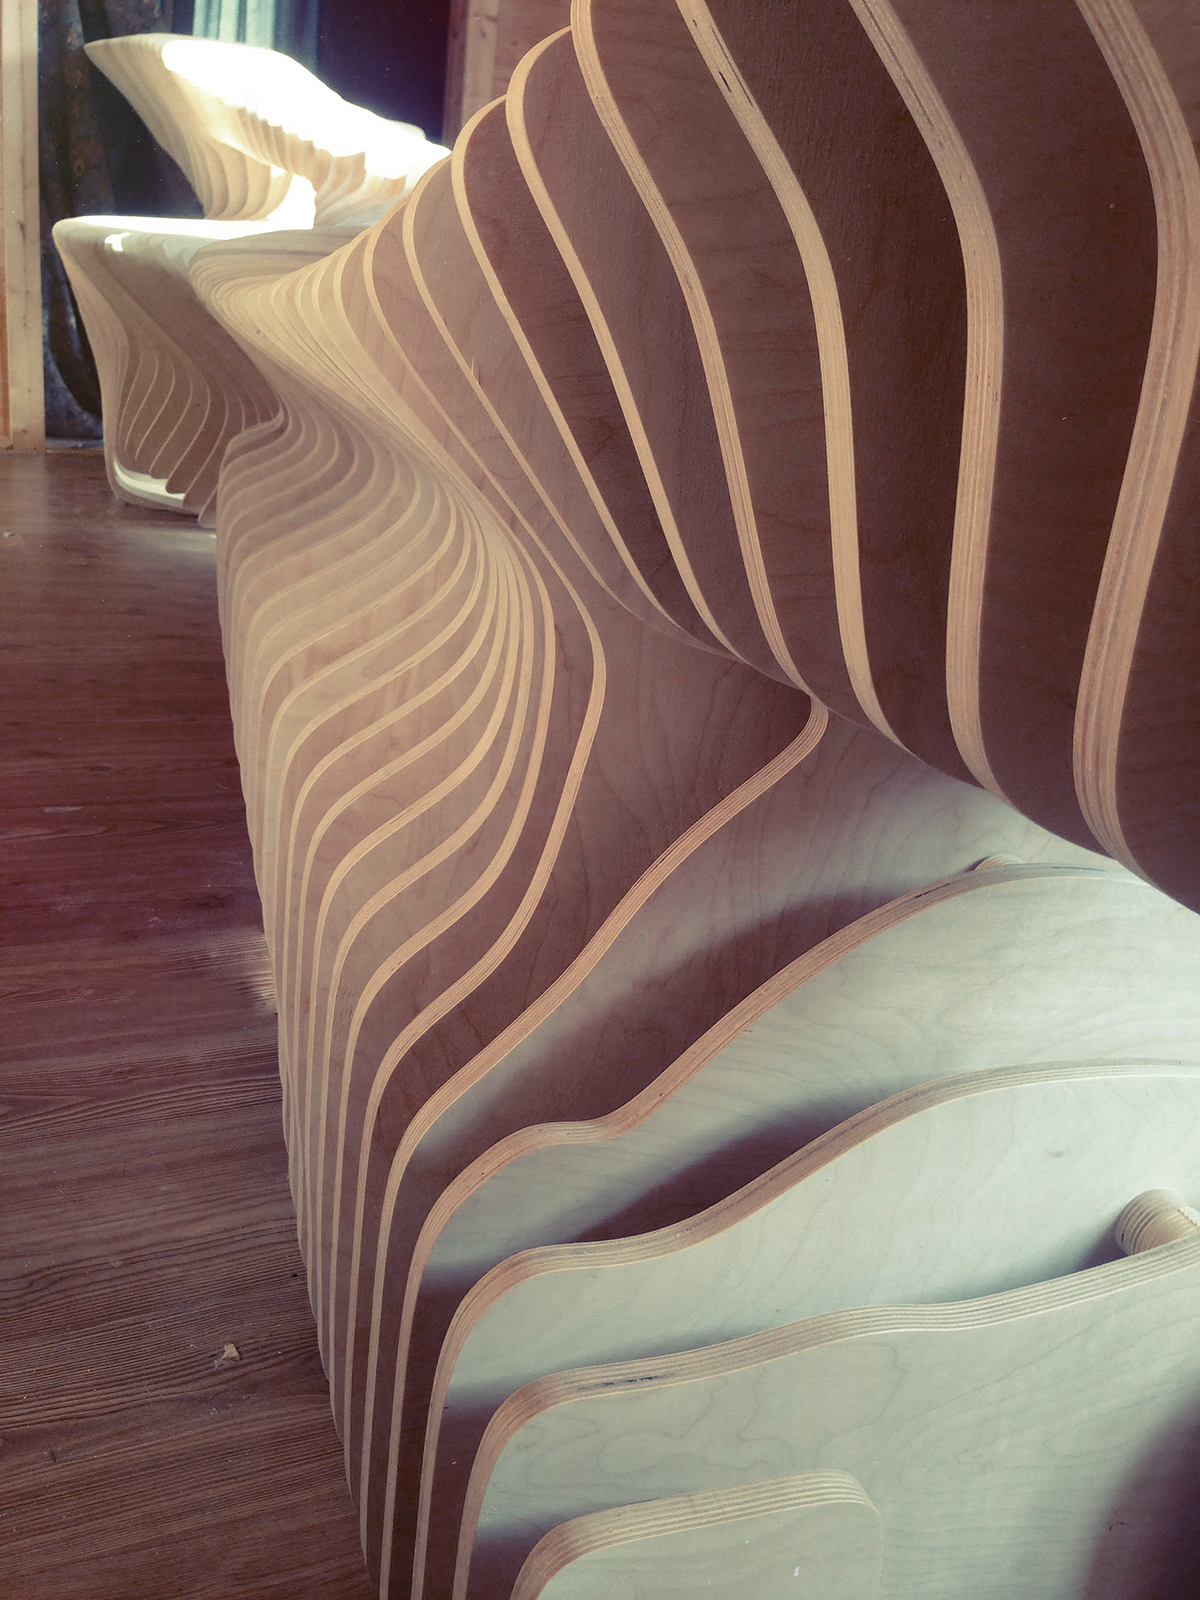 plywood modern organic after-form furniture design art shape Form non-linear sections smoth